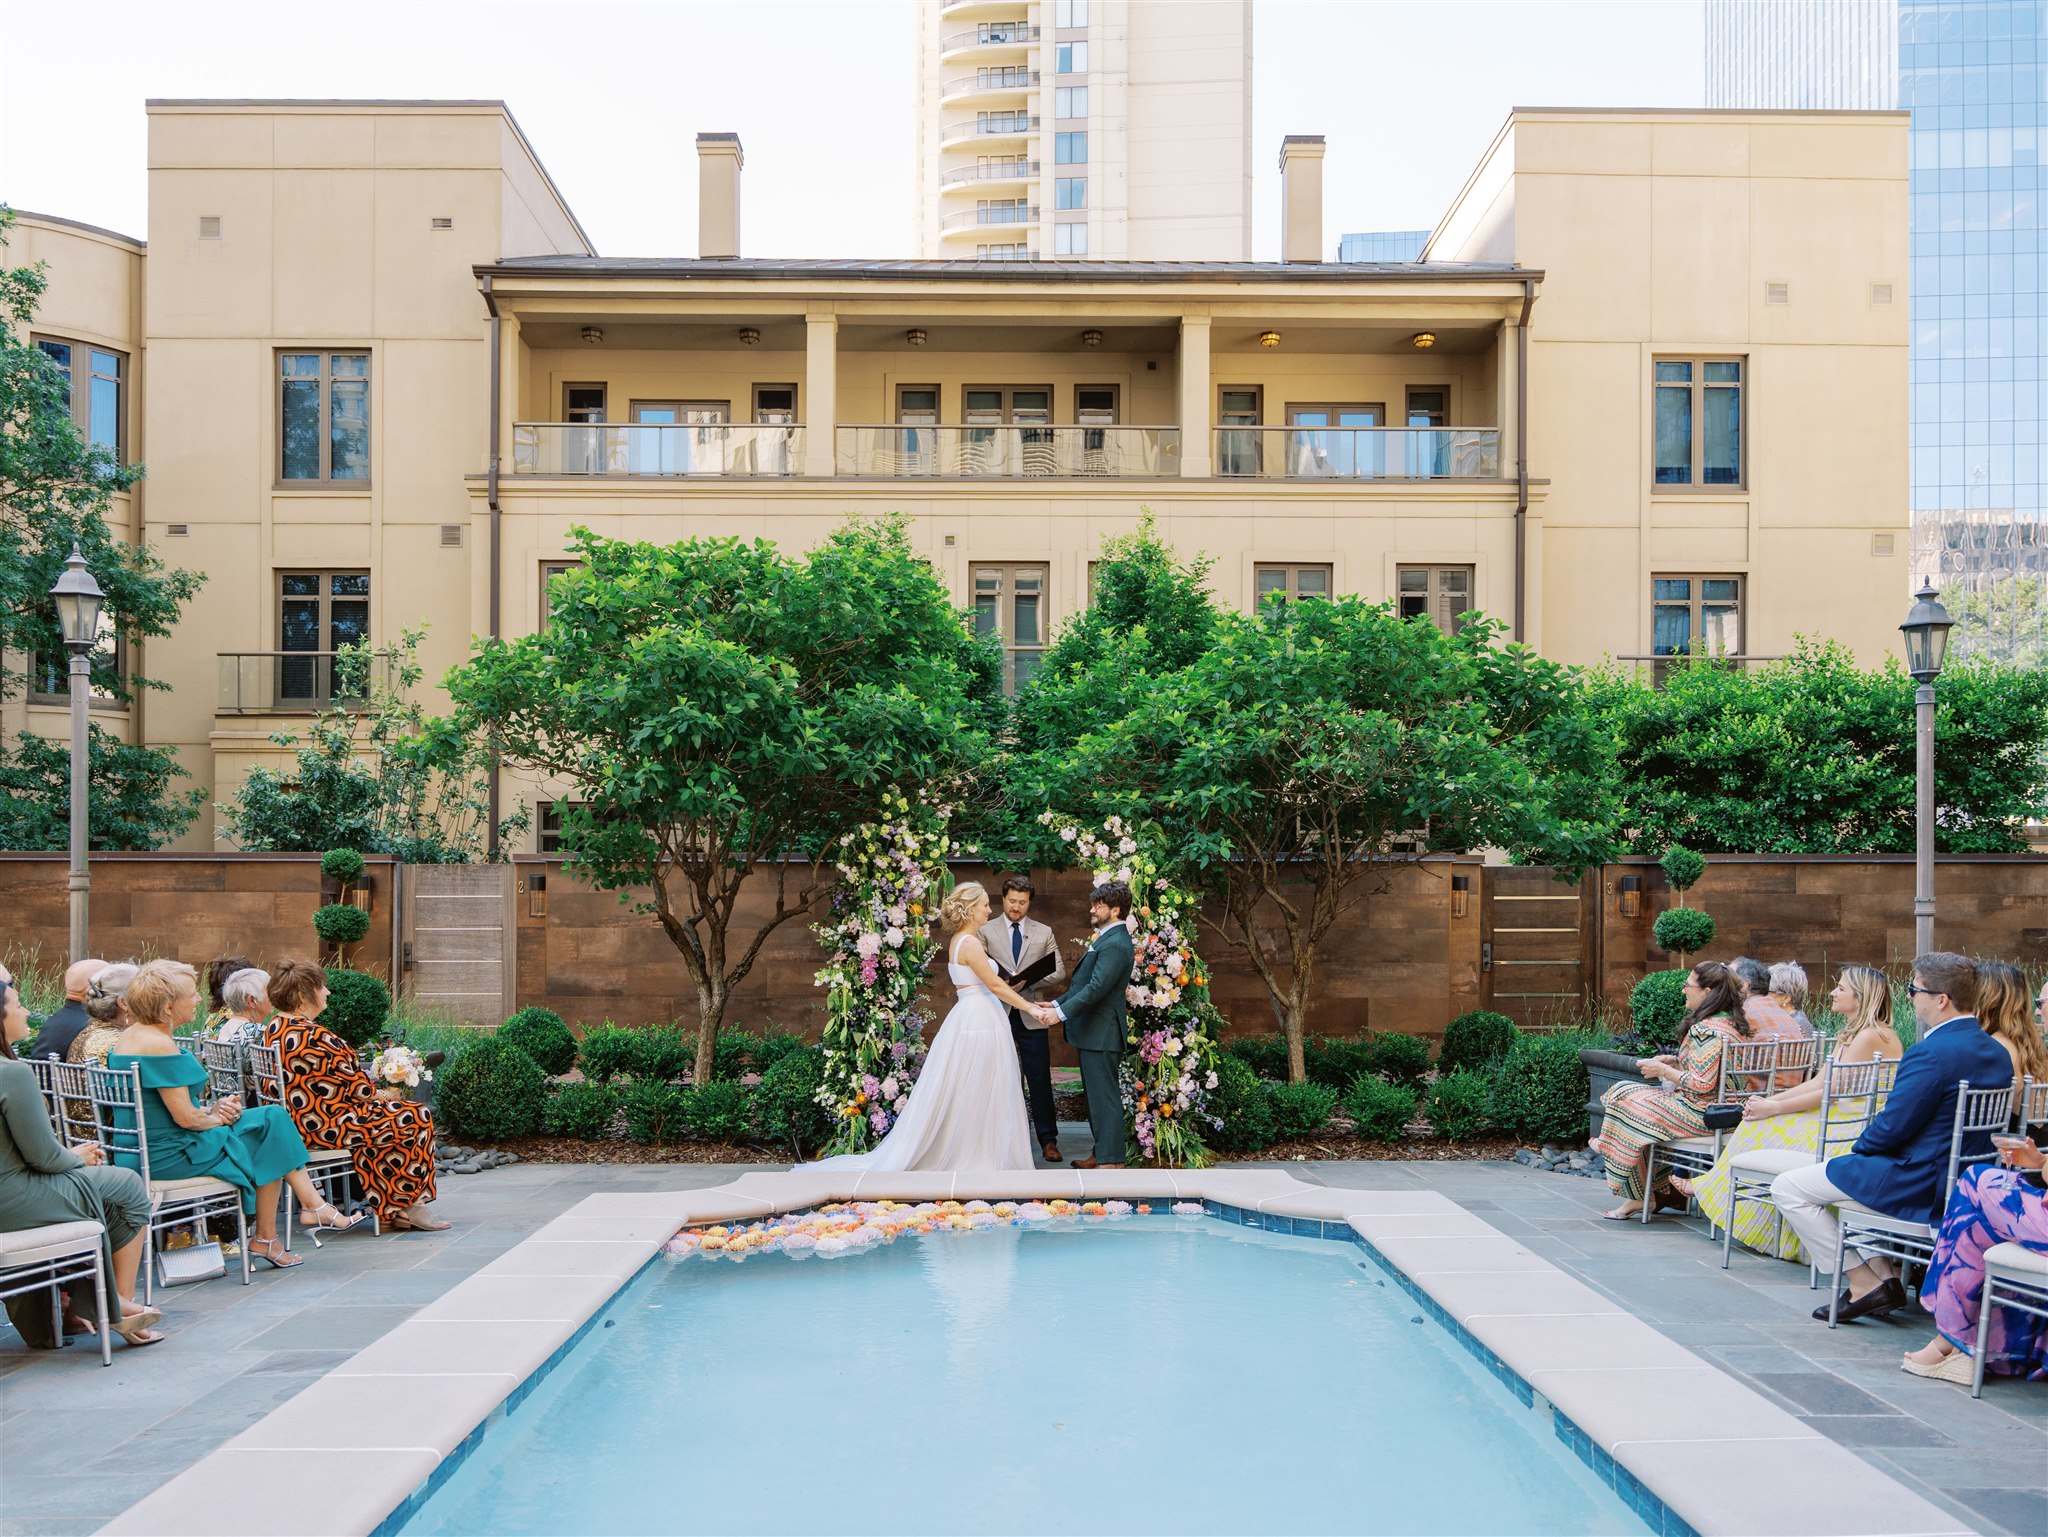 Intimate-Poolside-Wedding-at-Waldorf-Astoria-Buckhead-and-Exquisite-Dinner-Tasting-Reception-at-Lazy-Betty-Atlanta